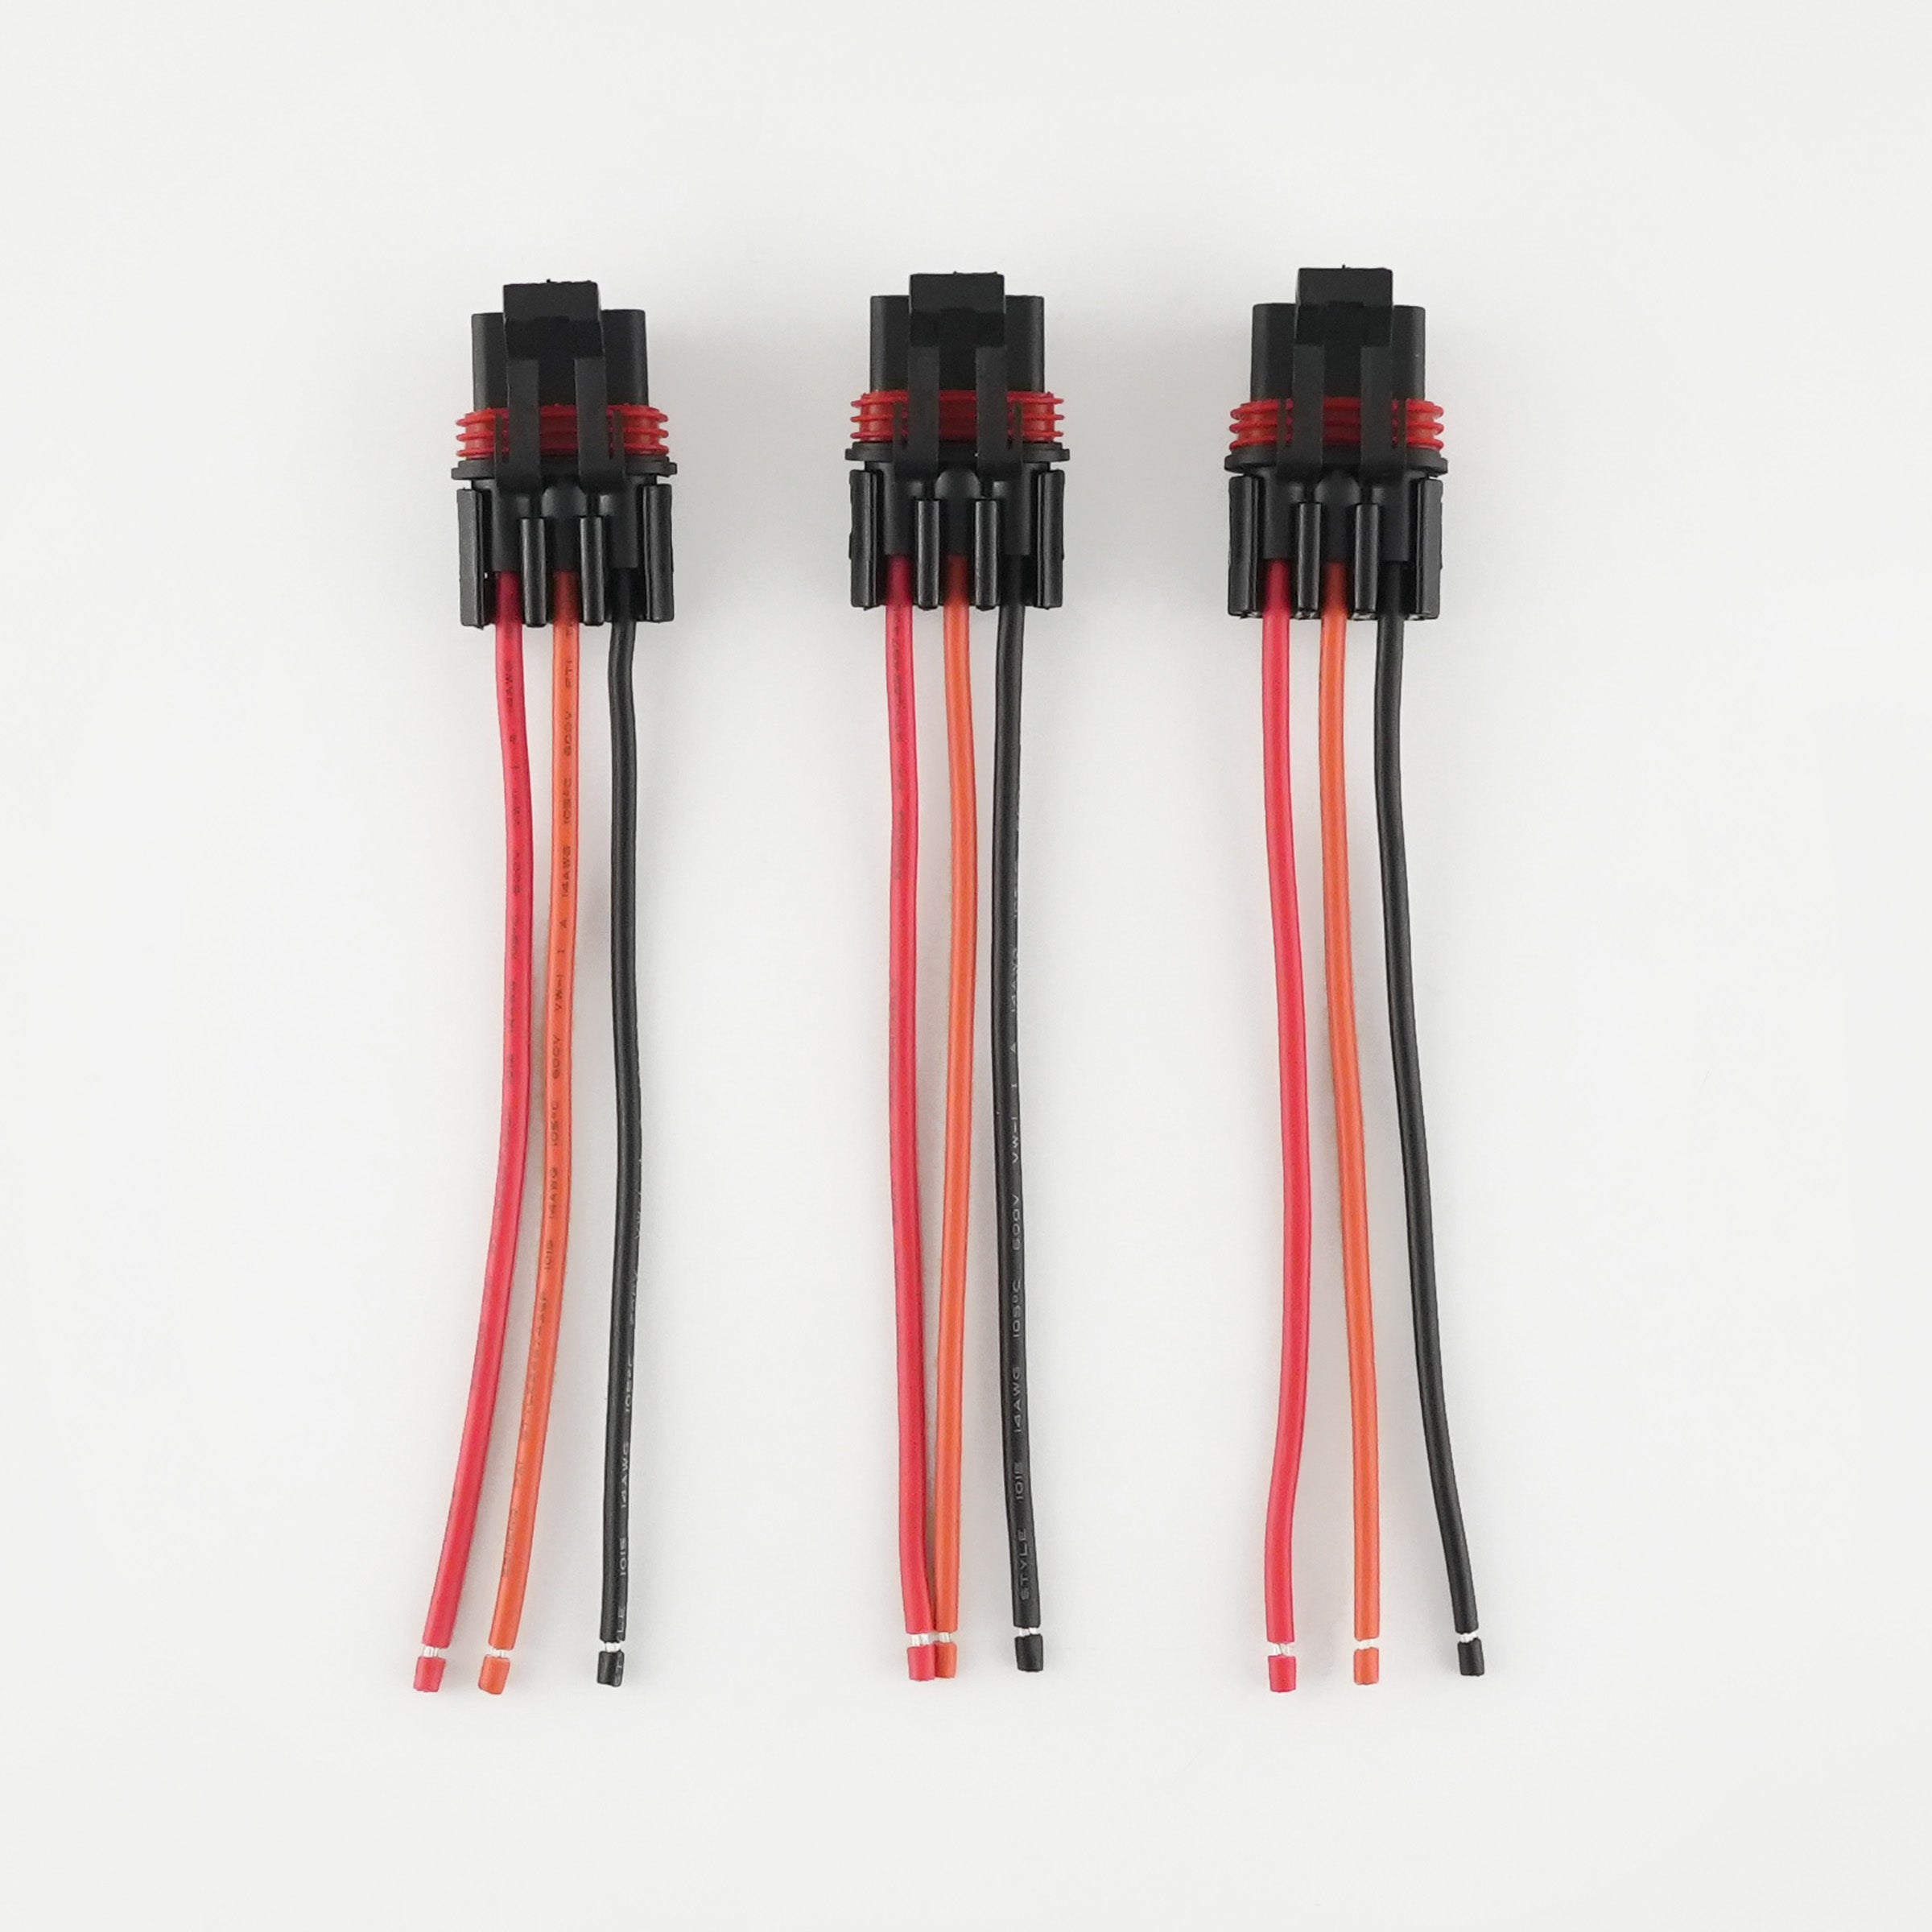 Polaris Pulse Busbar Pigtail Harness comes with three(Polaris Pulse Busbar Pigtail Harness - three pack)